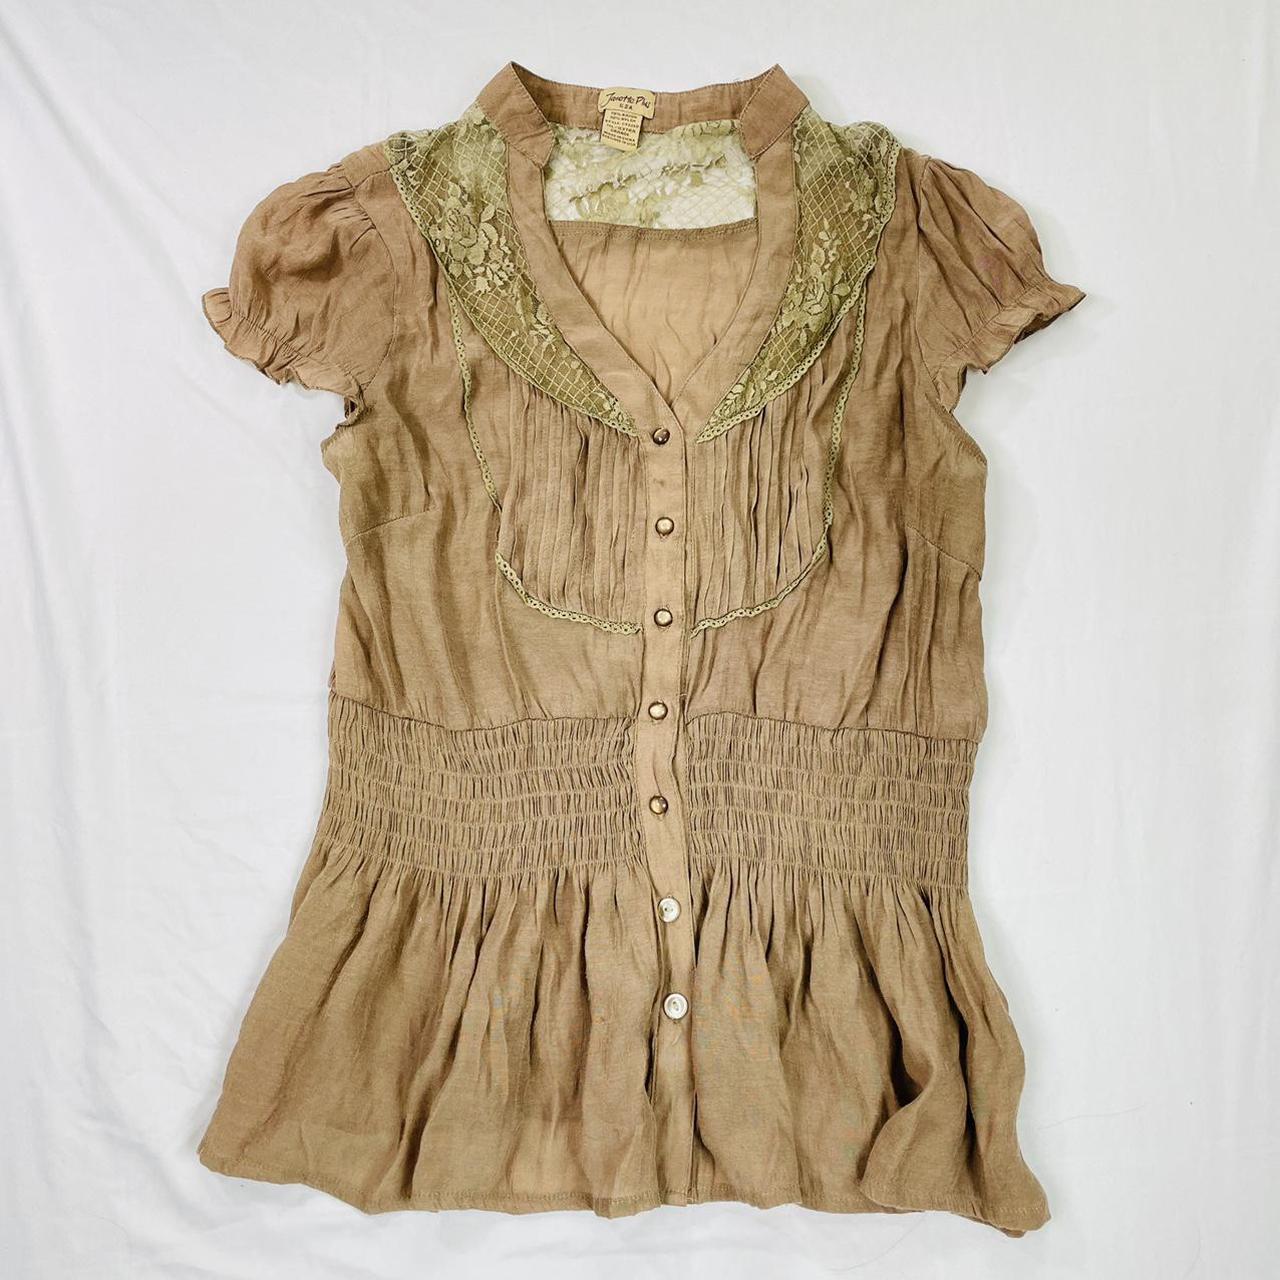 Product Image 1 - brown fairy top 

#fairy #cottagecore